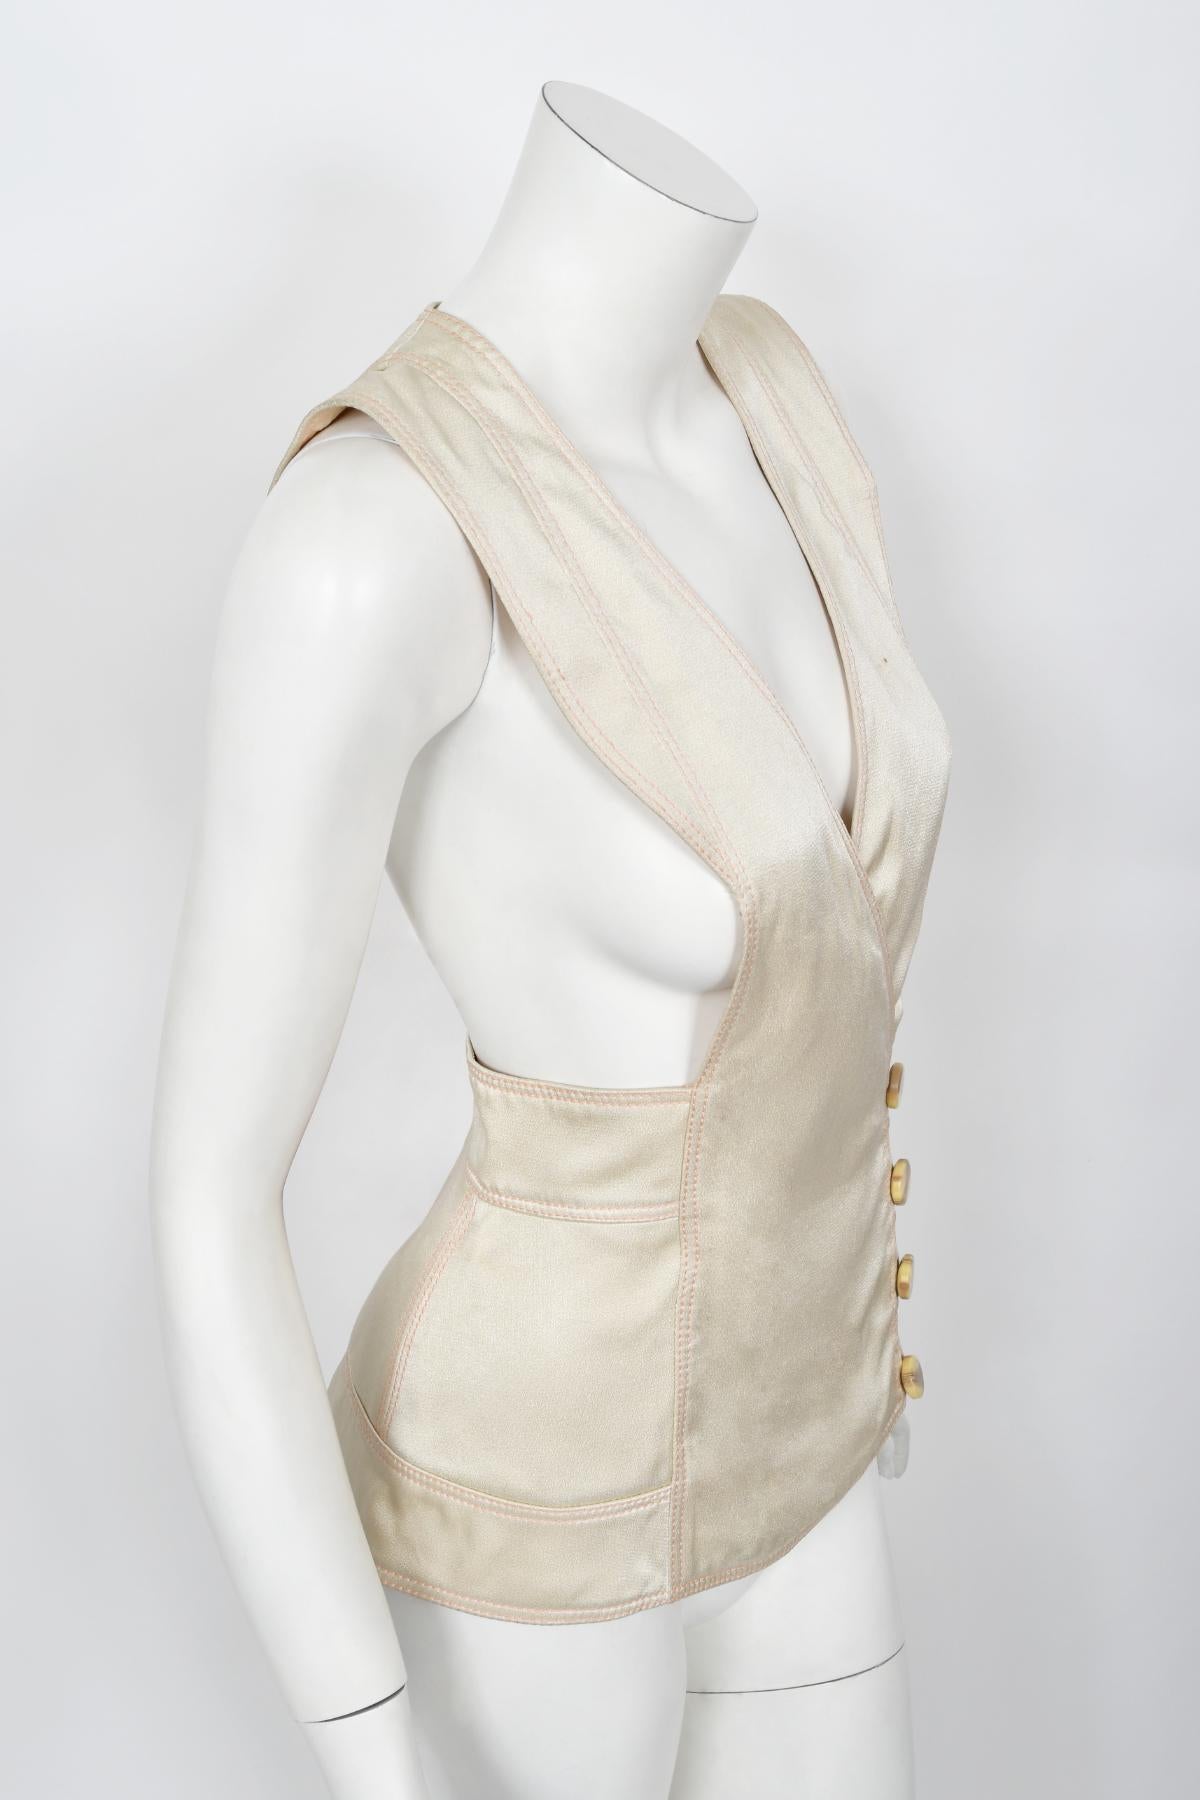 Vintage 1970's Bill Gibb Couture Embroidered Satin Mutton-Sleeve Jacket & Vest  For Sale 5